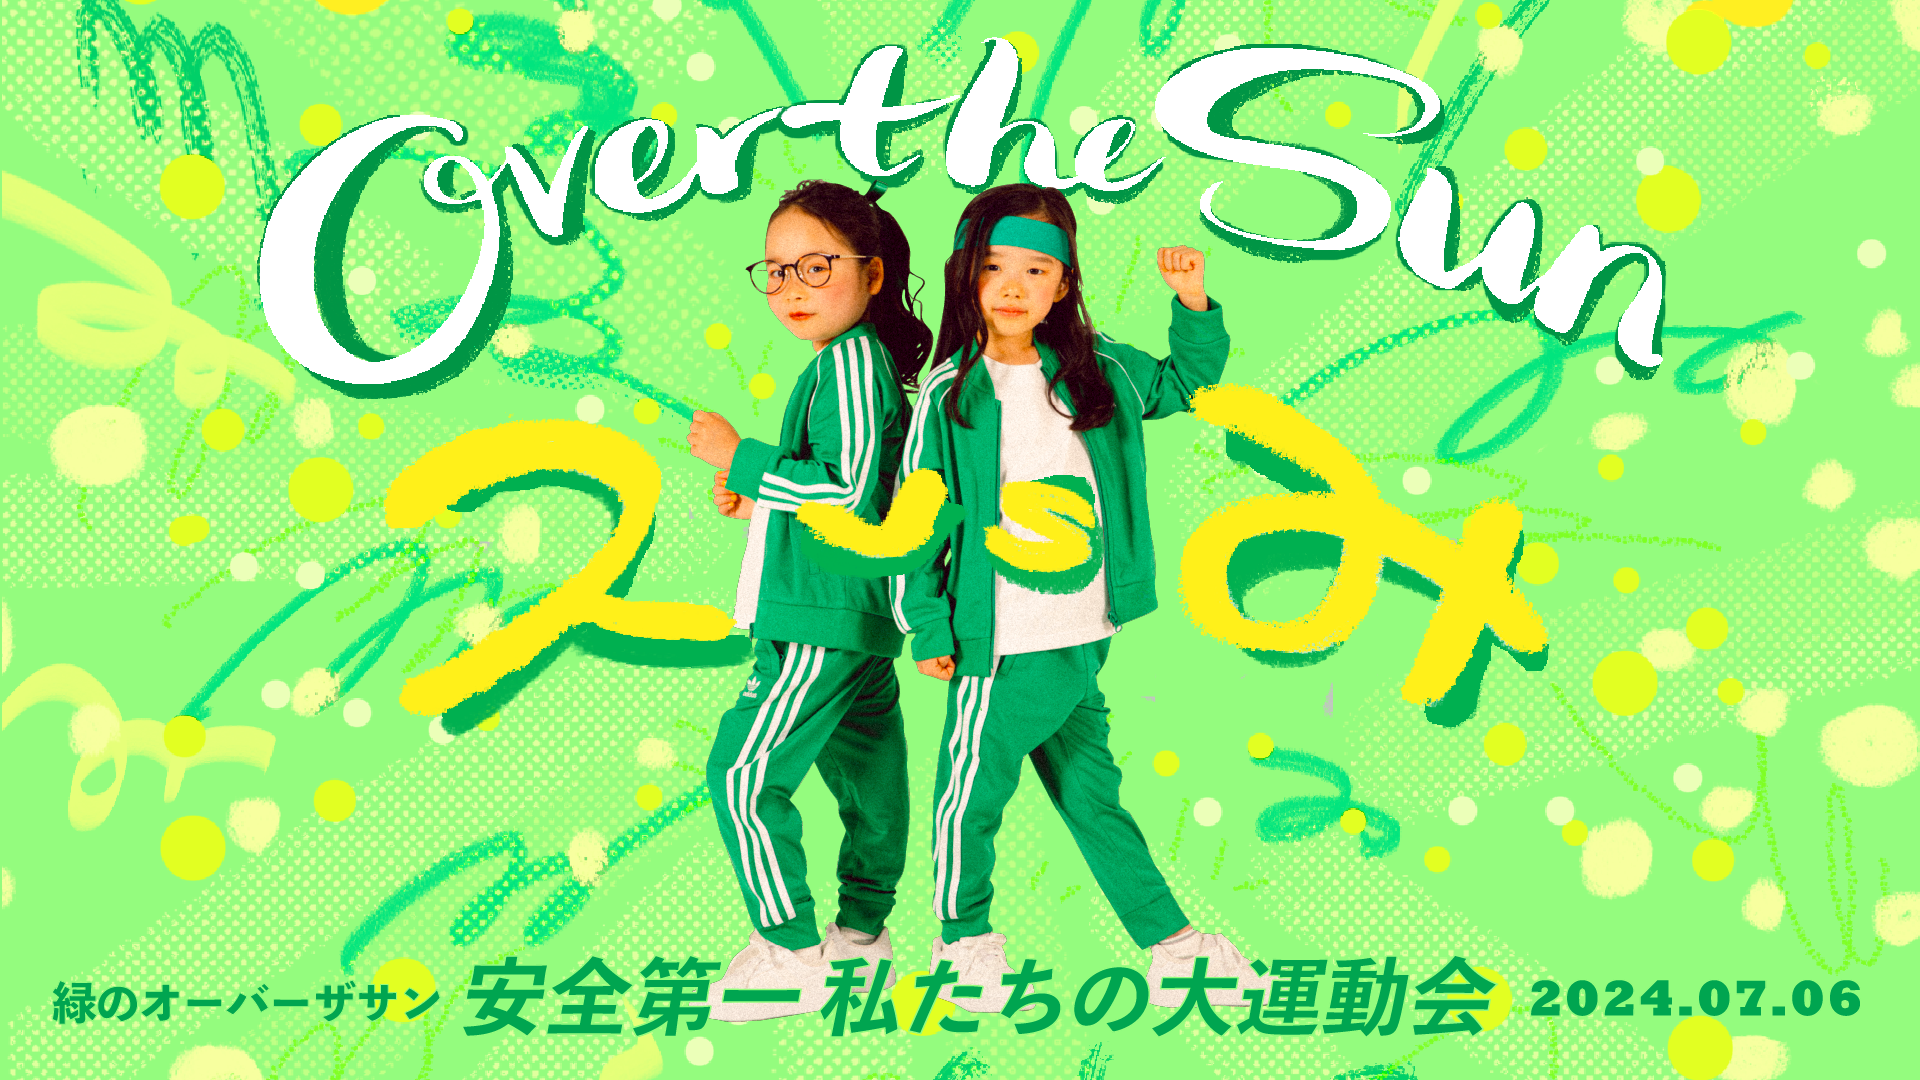 TBS Podcast『OVER THE SUN』大運動会の競技種目とチケット詳細が発表に！のサブ画像1